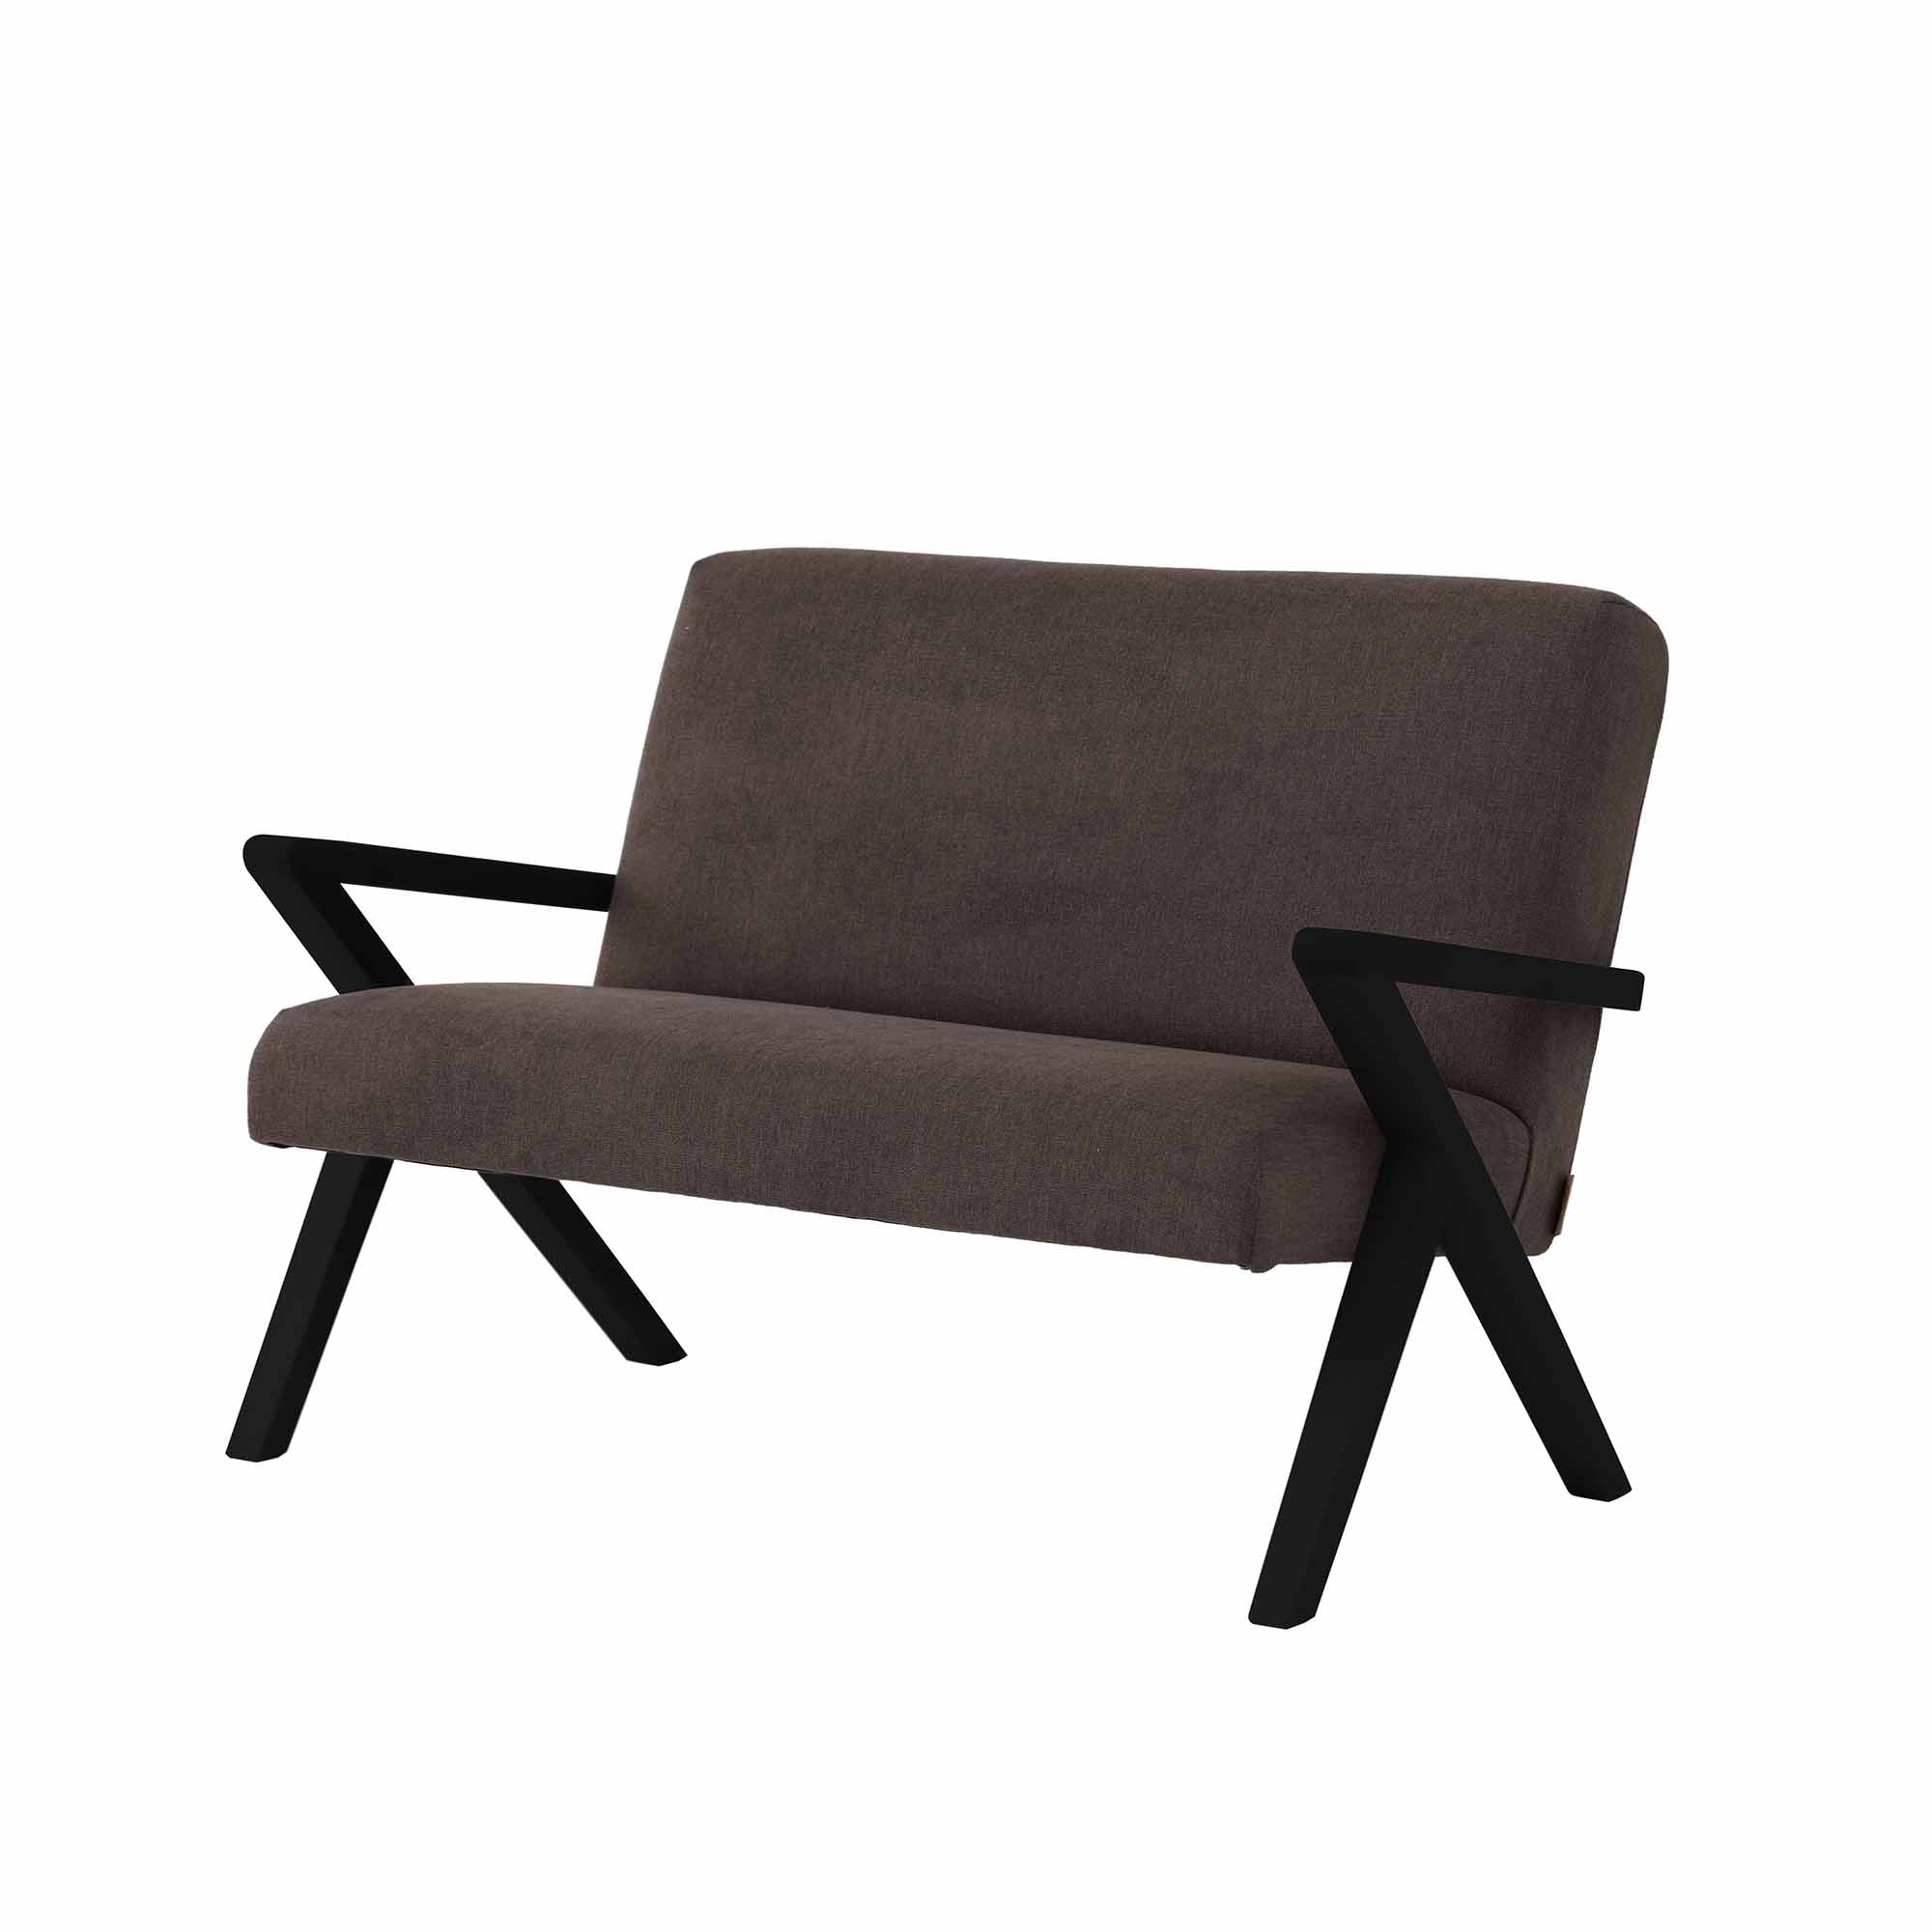  2-Seater Sofa, Beech Wood Frame, Black Lacquered brown fabric, half-side view